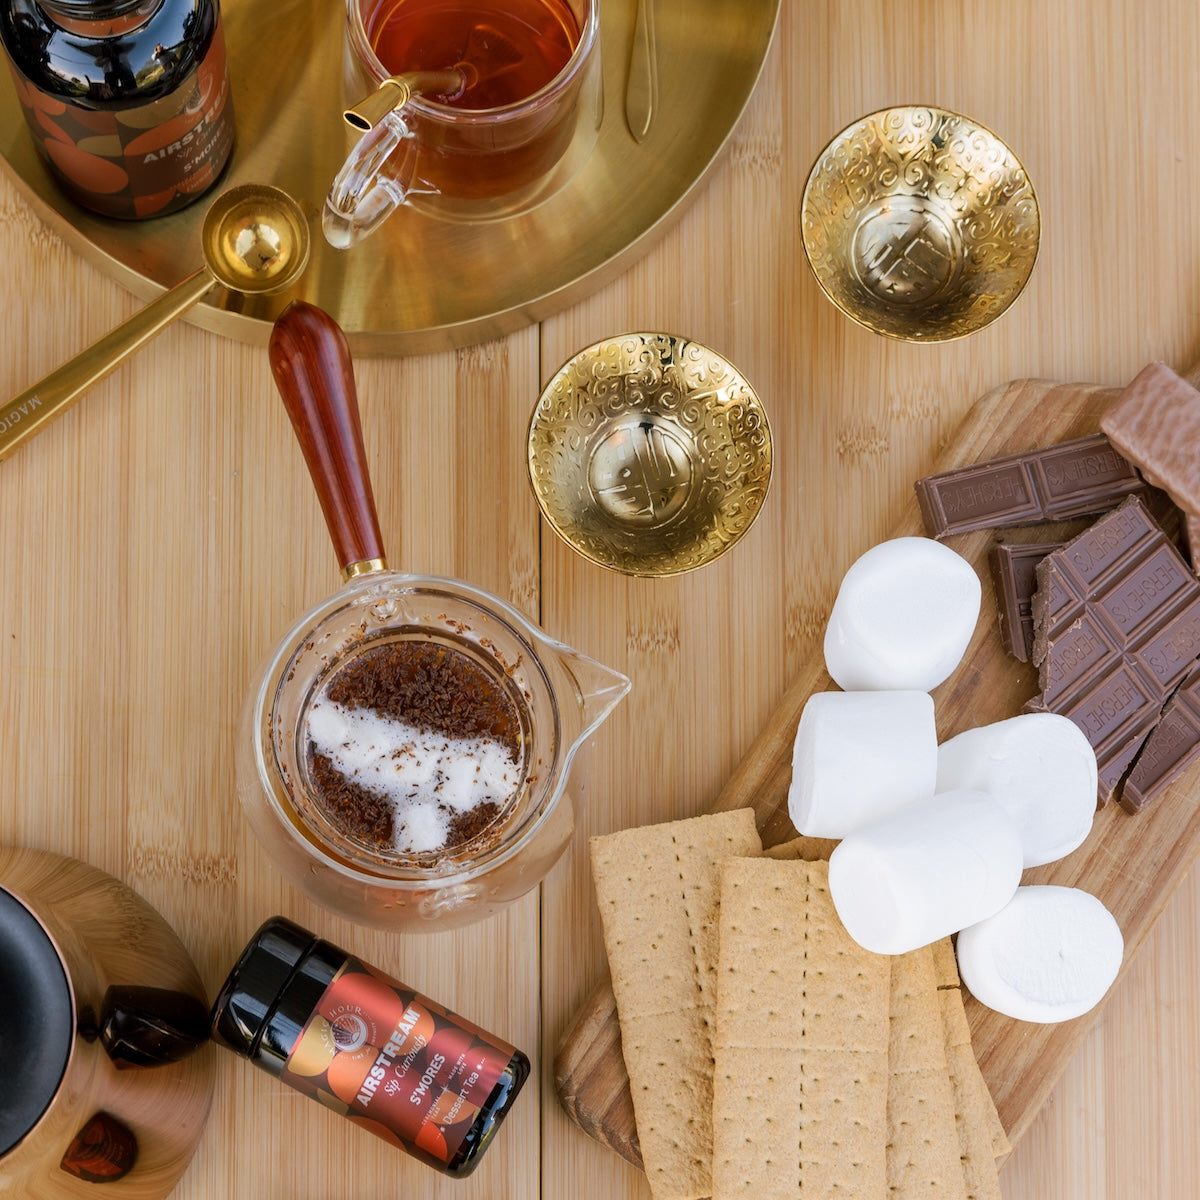 A top-down view of a wooden table set for s&#39;mores preparation. Ingredients include marshmallows, graham crackers, and chocolate bars on a wooden board. A cup of S&#39;mores Tea by Magic Hour, tea-making utensils with loose leaf tea, a jar of spice, and two ornate golden cups are also present.